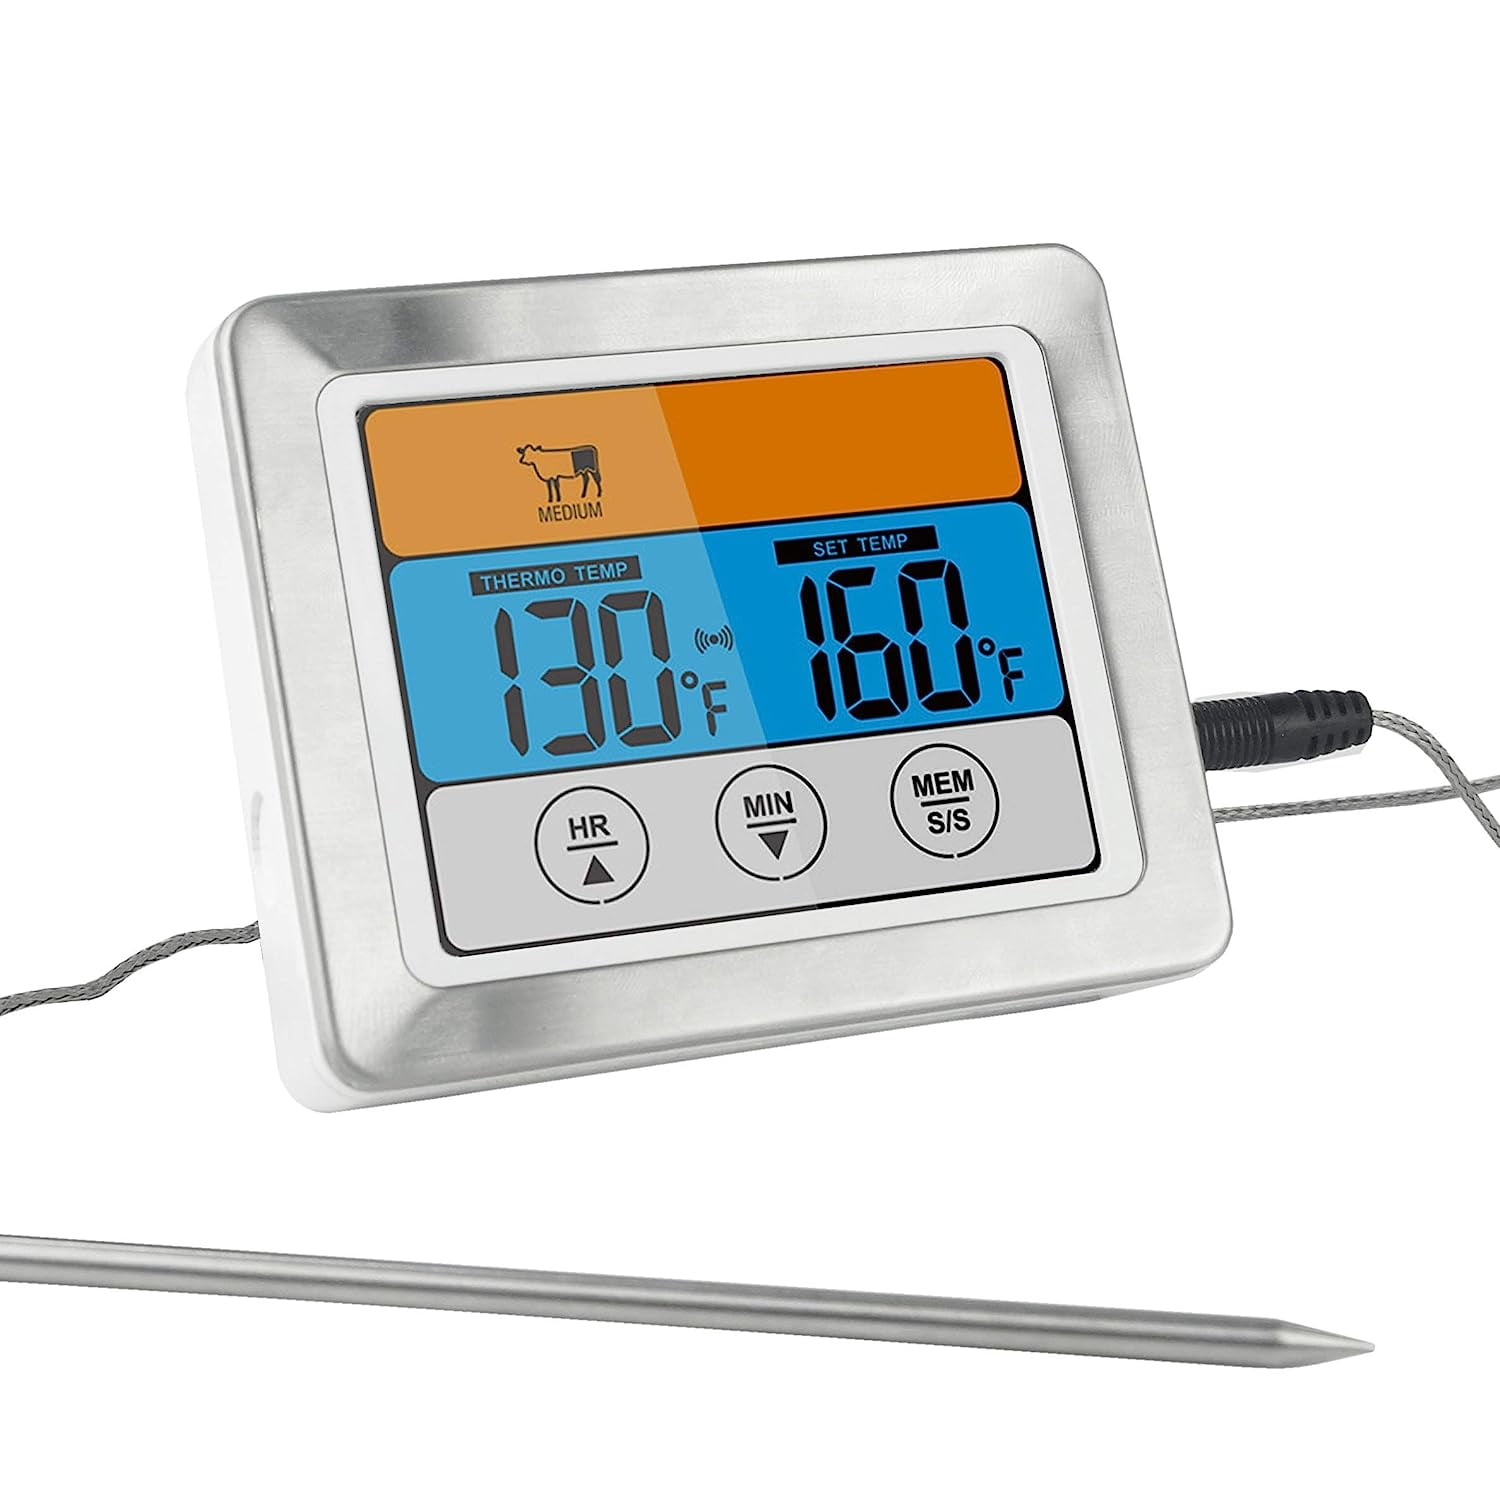 Large LCD Display BBQ Thermometer with Timer - Stainless Steel Temperature  Probe for Precise Cooking 